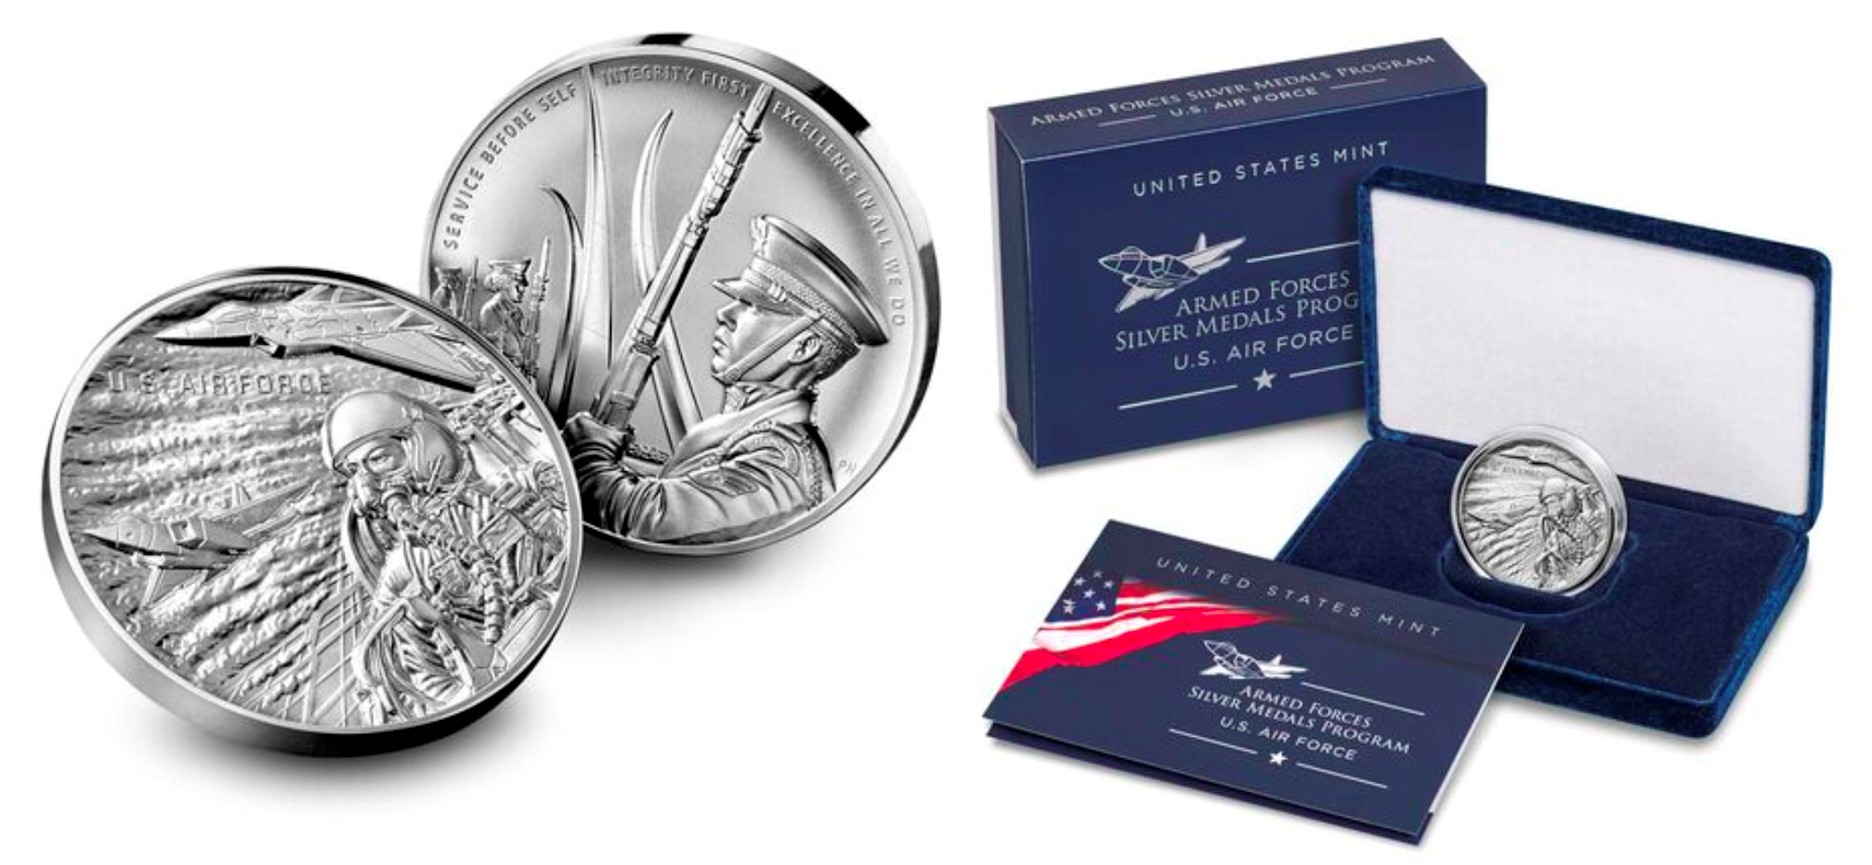 the US Air Force medal